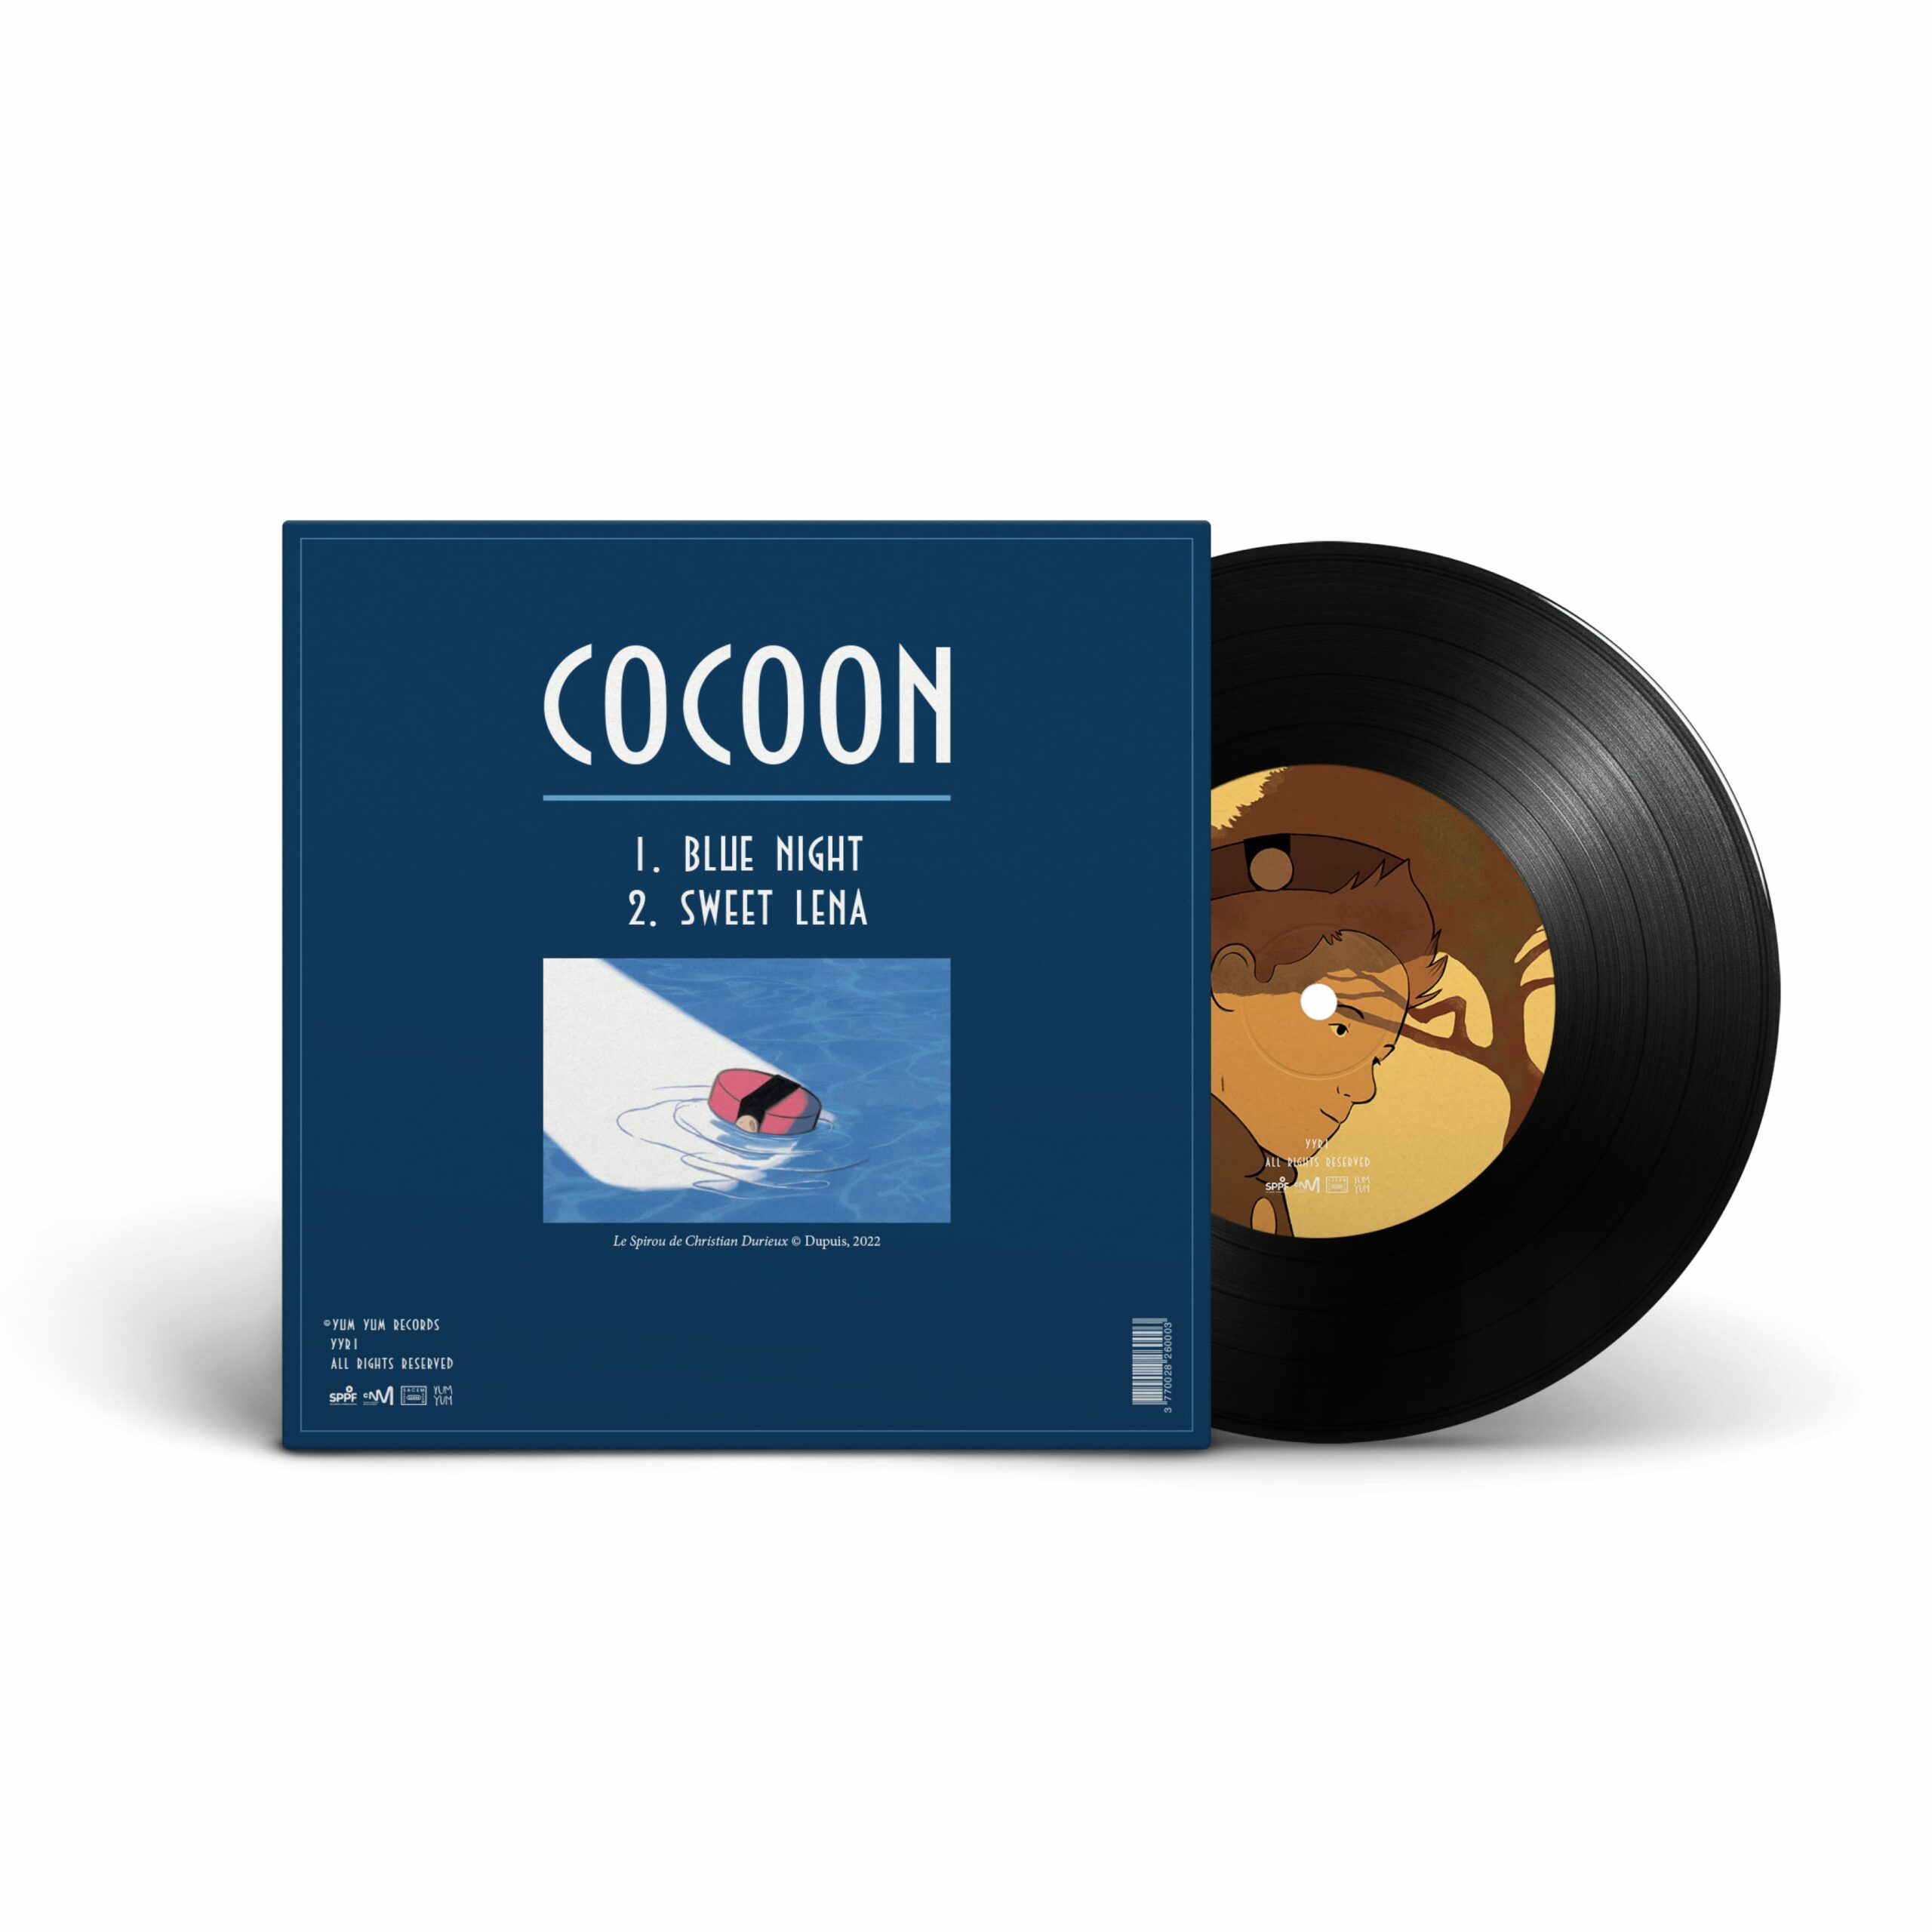 Yum Yum Records - Cocoon – Pacific Palace